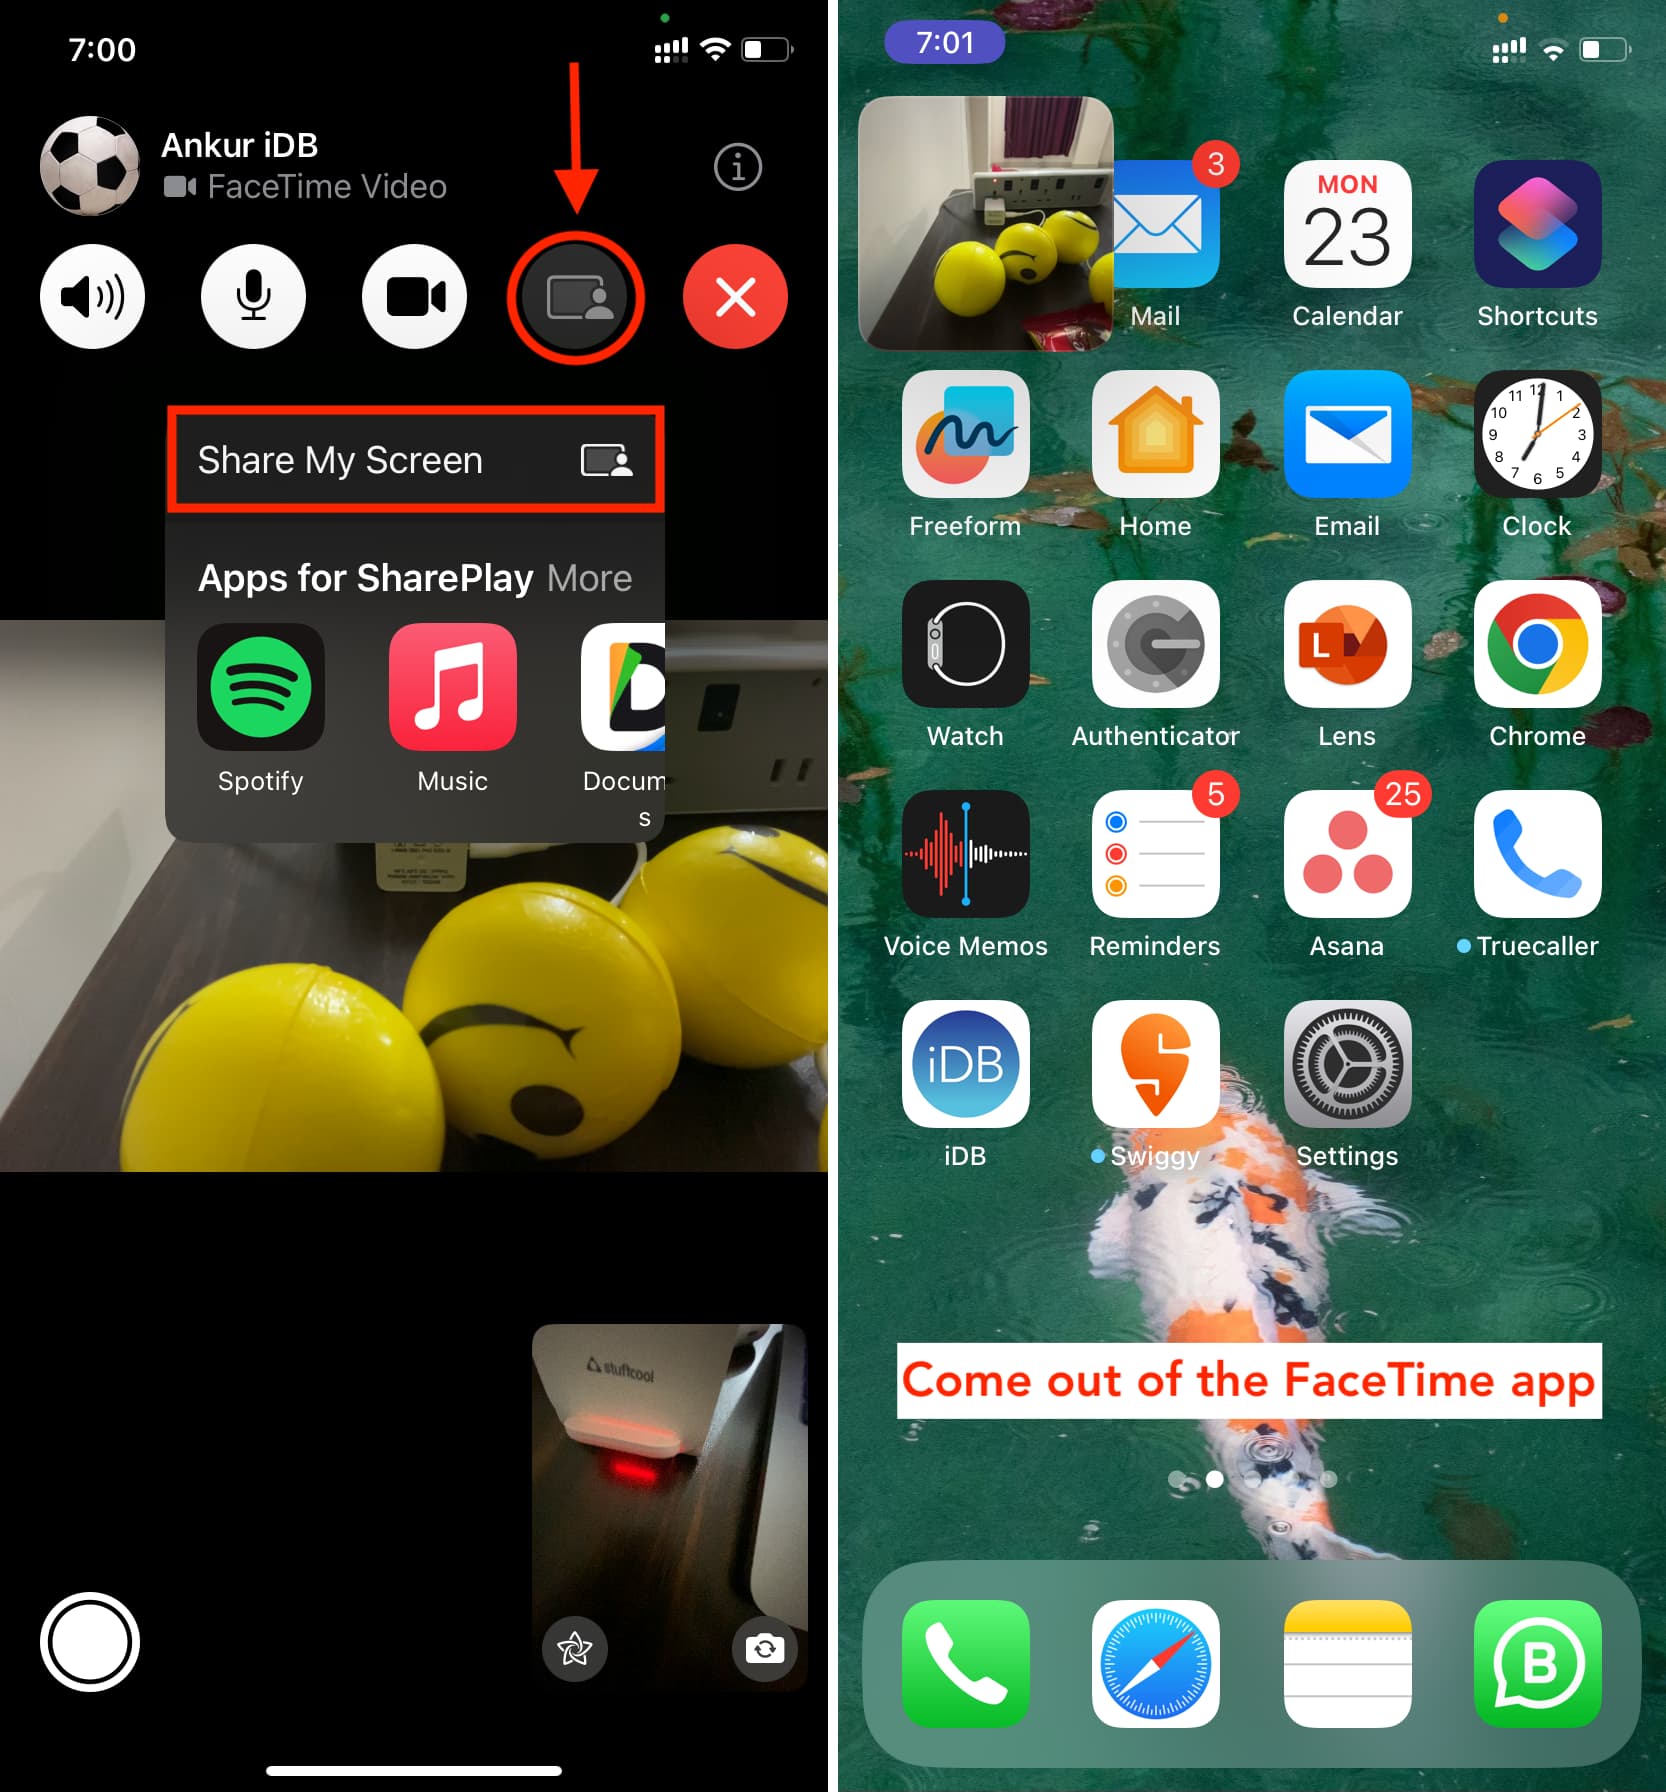 Highlighted screenshot showing how to share your iPhone screen via FaceTime